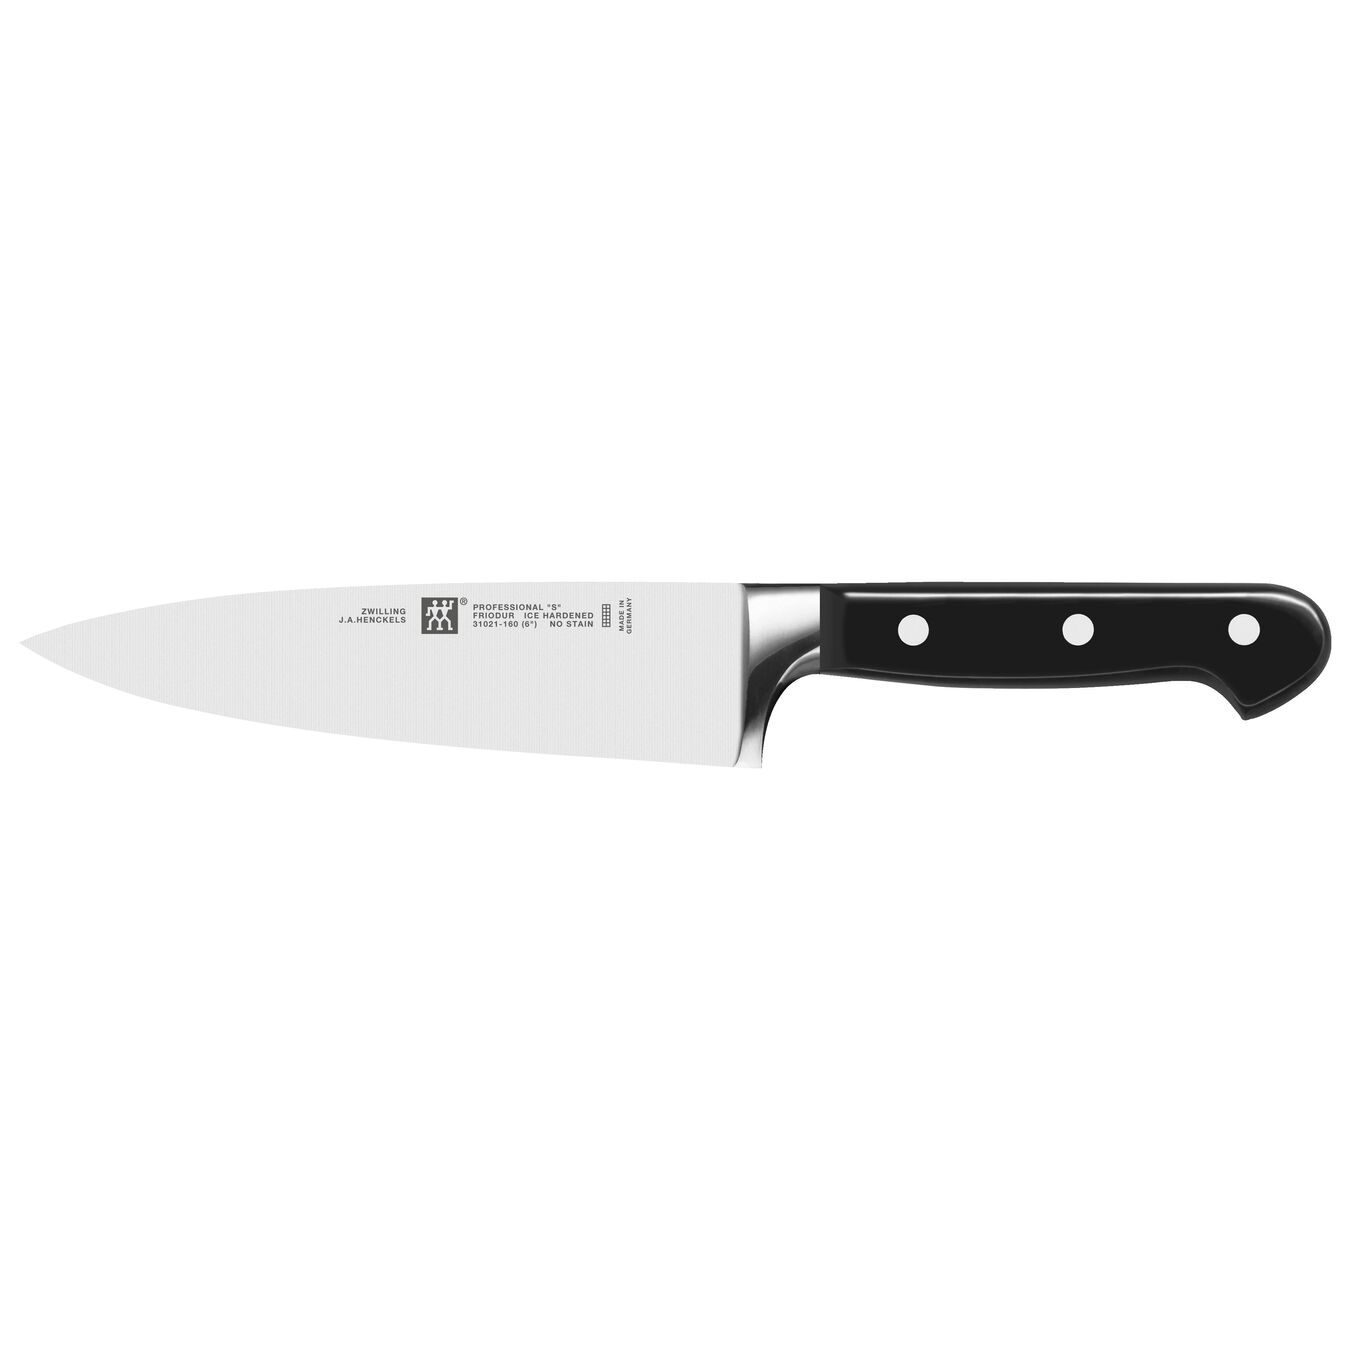 ZWILLING Professional Chef's knife | ZWILLING.COM